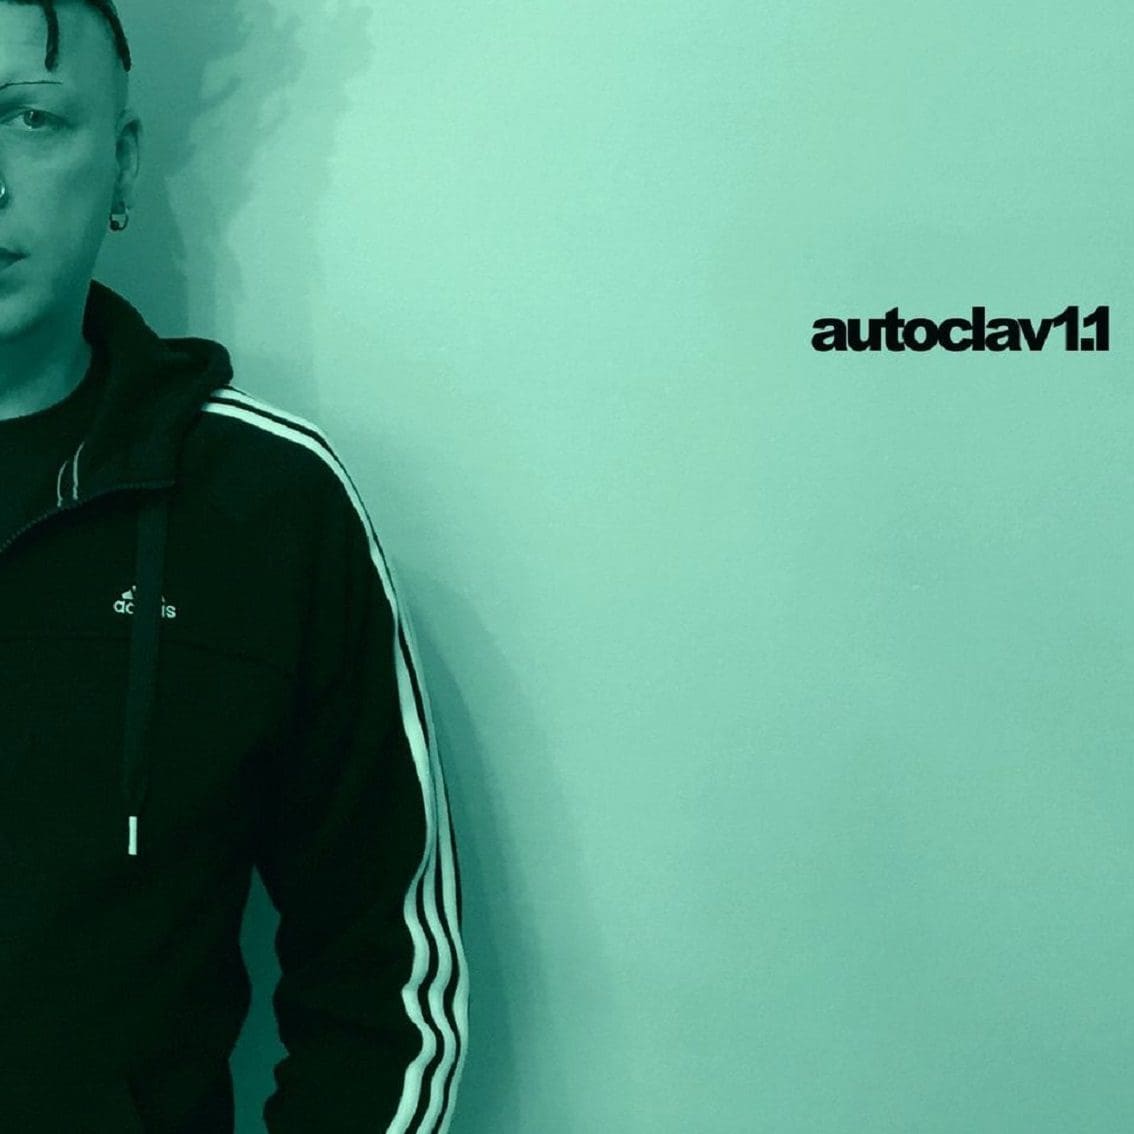 Autoclav1.1 – Gone Long Before the Death of the Sun (album – Audiophob)